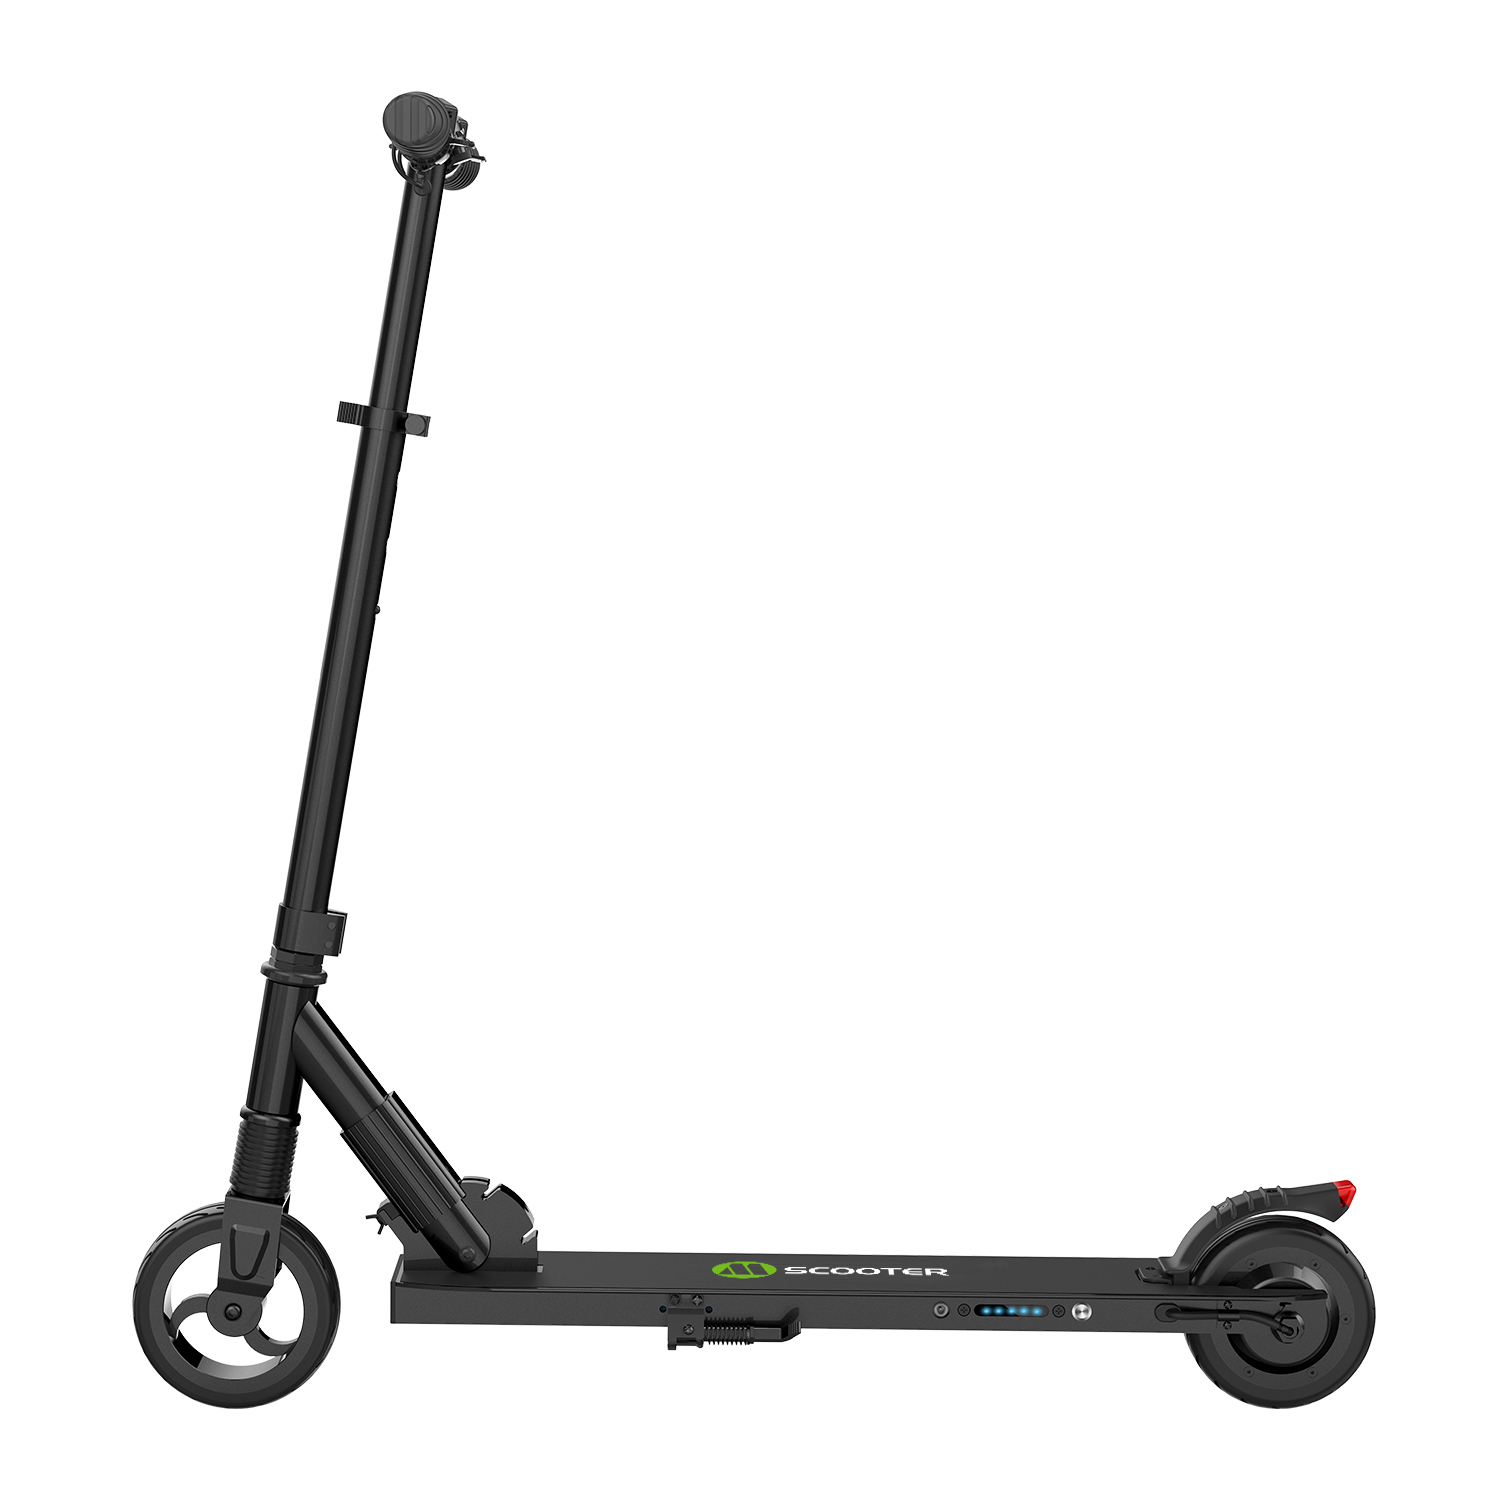 Find US Direct Megawheels S1 5Ah 250W Motor Portable Folding Electric Scooter 23km/h Max Speed Micro Electronic Braking System for Sale on Gipsybee.com with cryptocurrencies